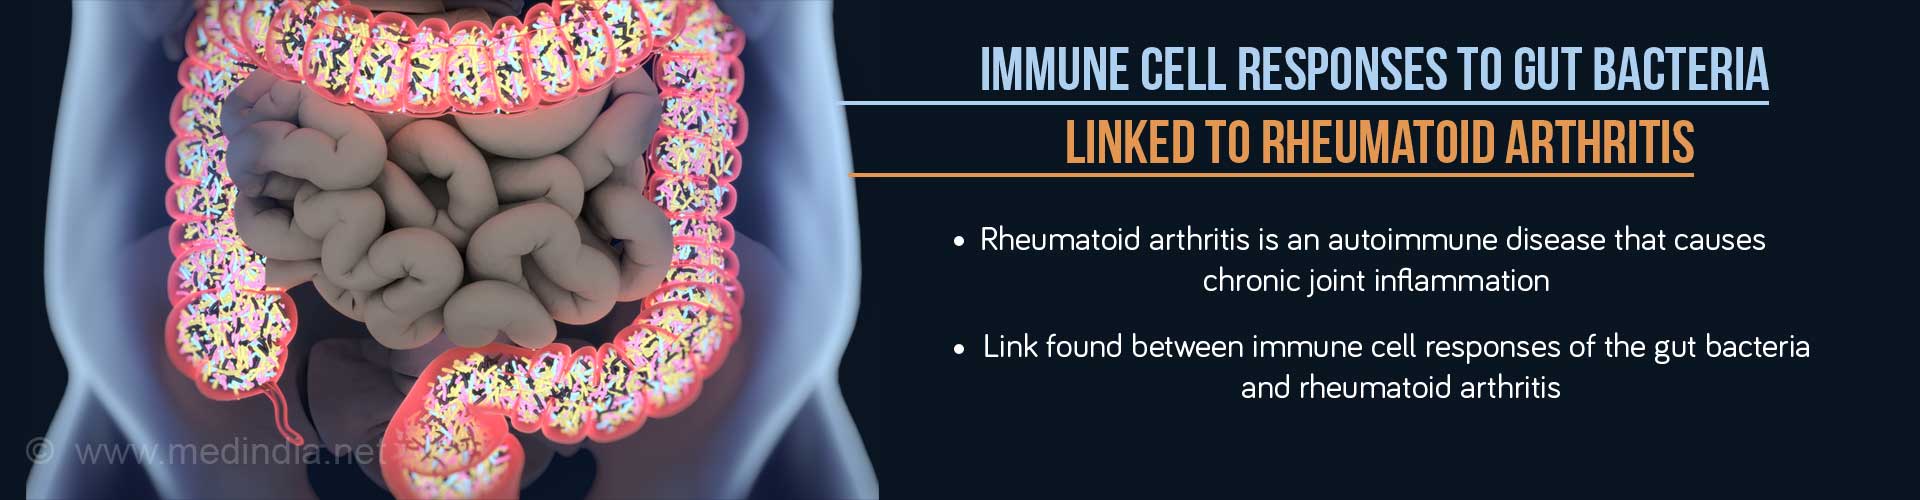 Immune cell responses to gut bacteria linked to rheumatoid arthritis
- Rheumatoid arthritis is an autoimmune disease that causes chronic joint inflammation
- Link found between immune cell responses of the gut bacteria and rheumatoid arthritis